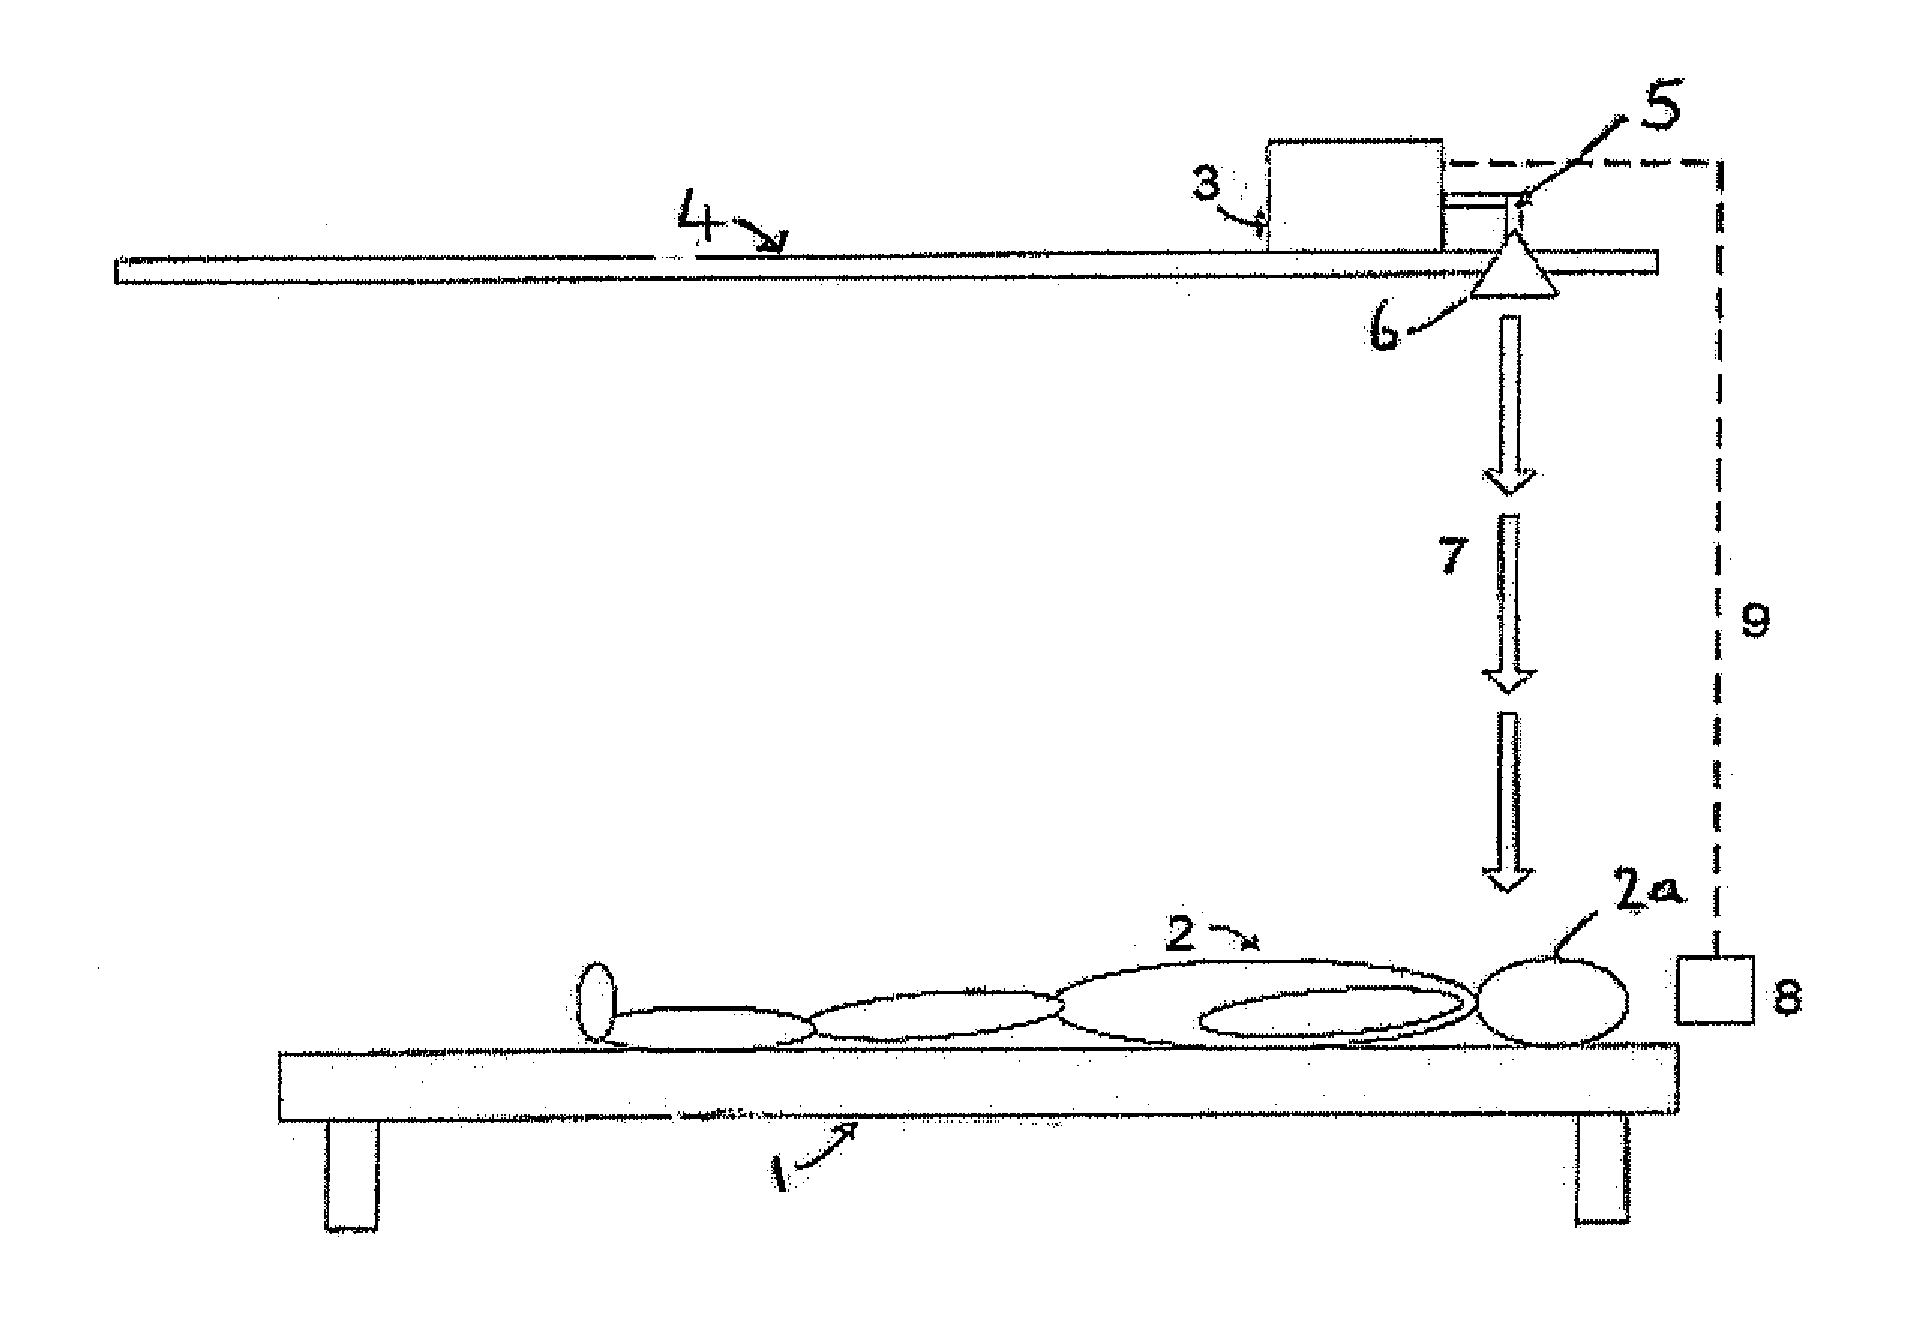 Treatment or Therapy Apparatus